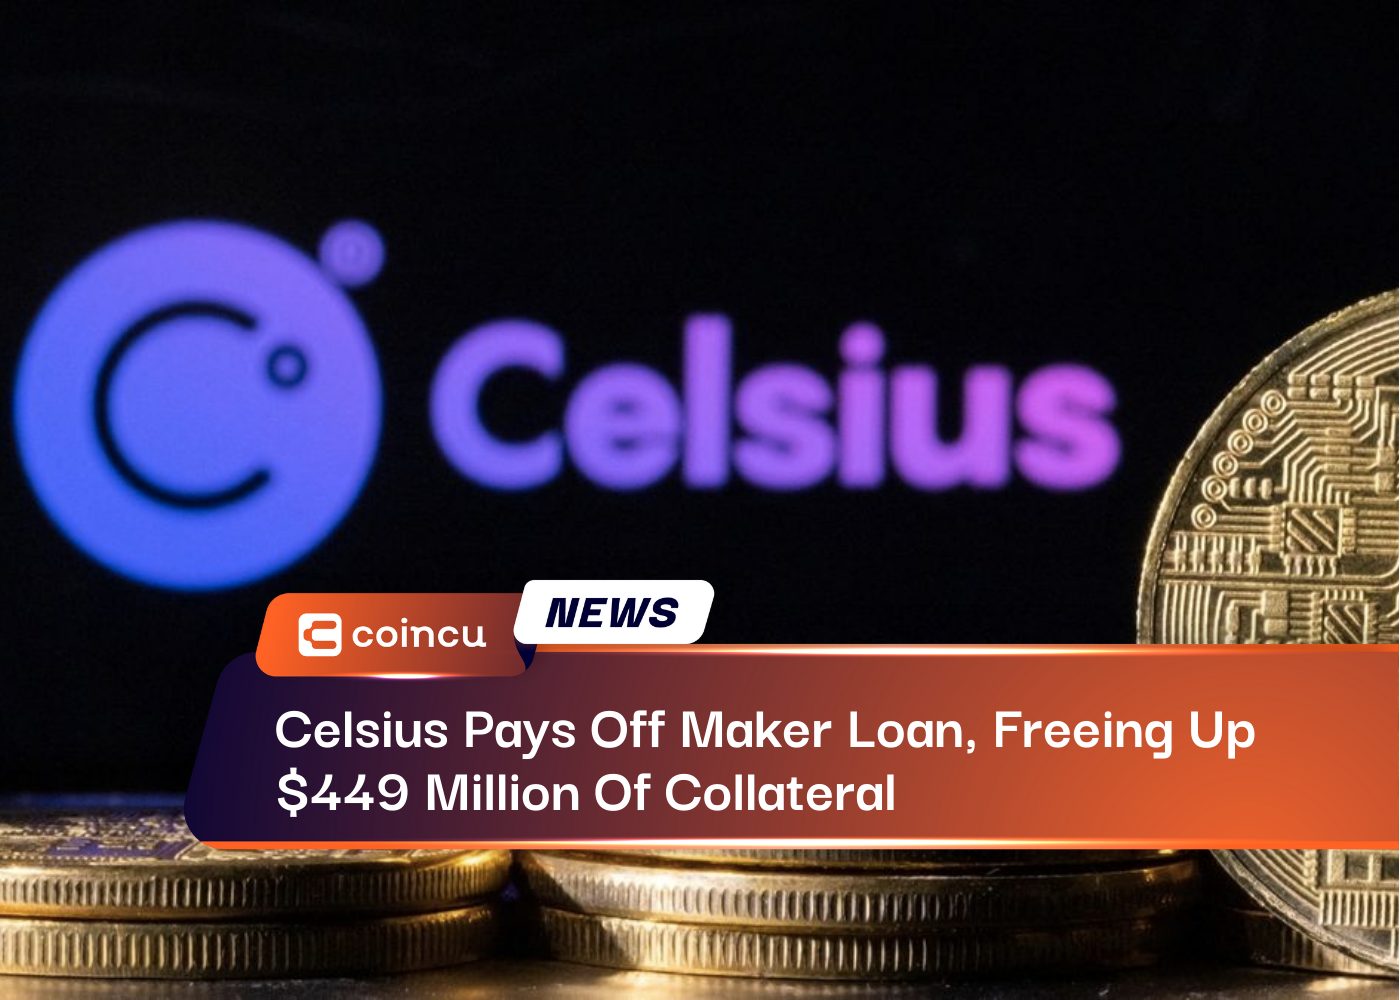 Celsius Pays Off Maker Loan, Freeing Up $449 Million Of Collateral